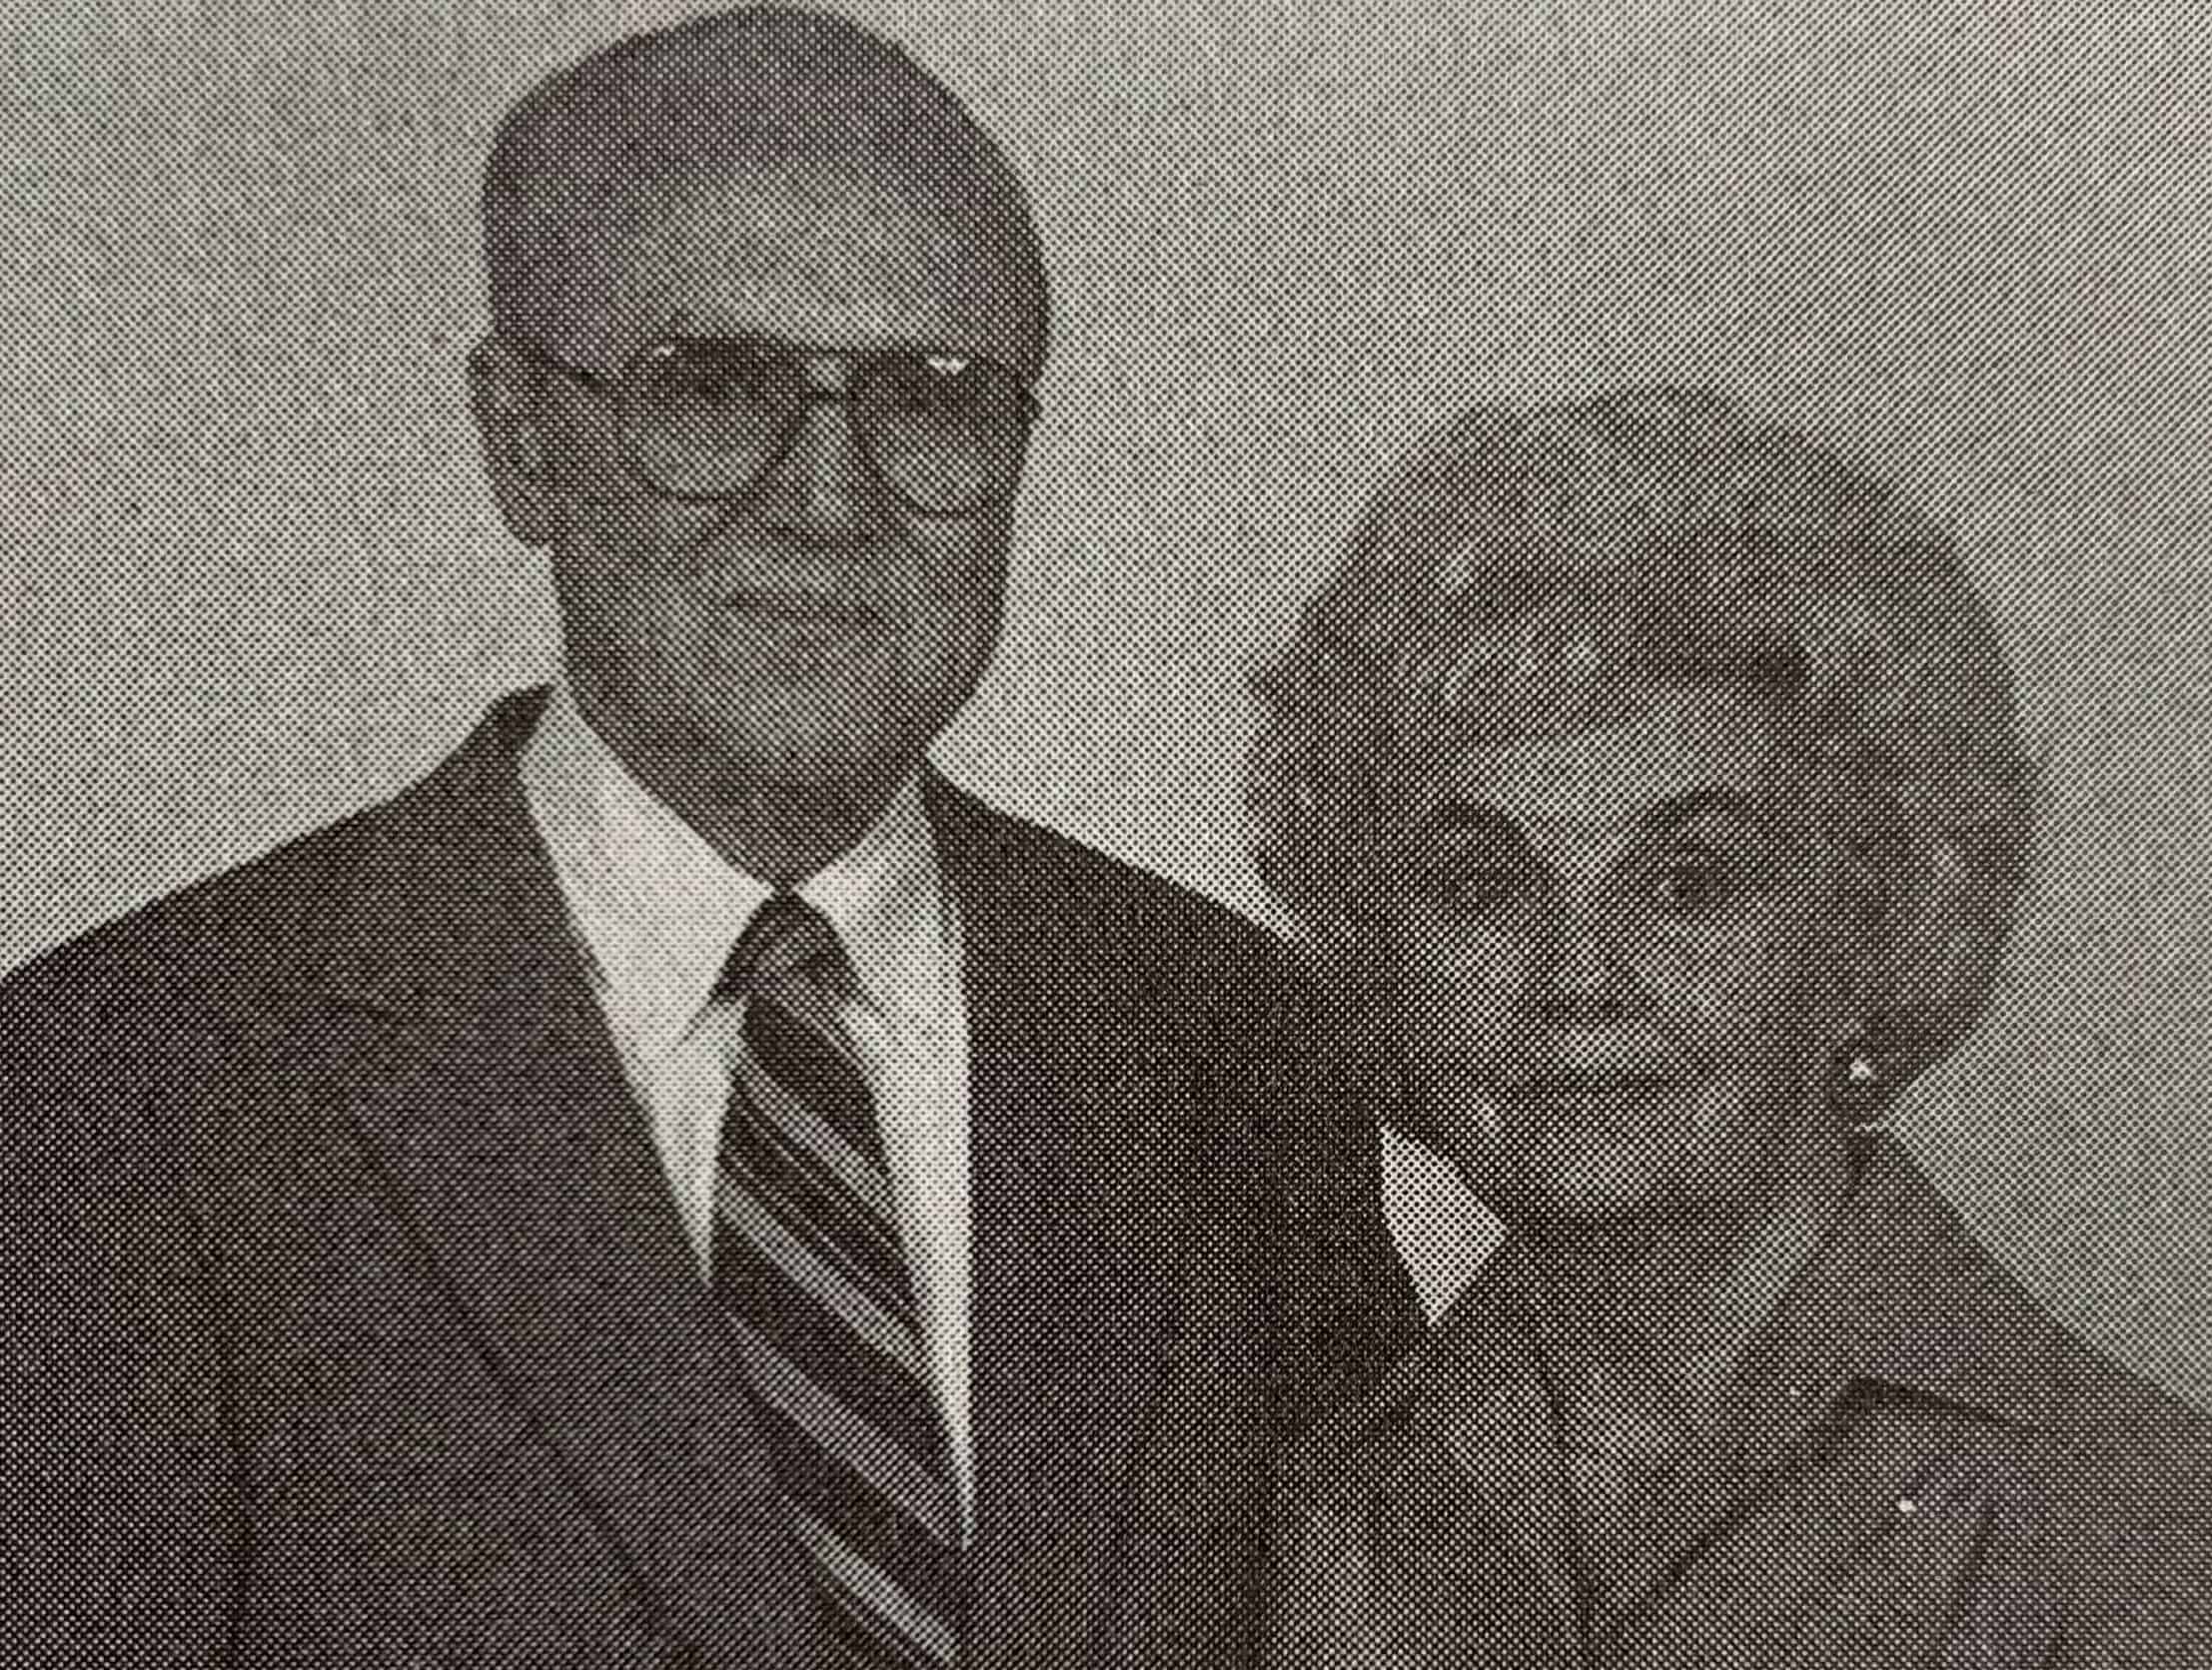 Ed and Mary Price